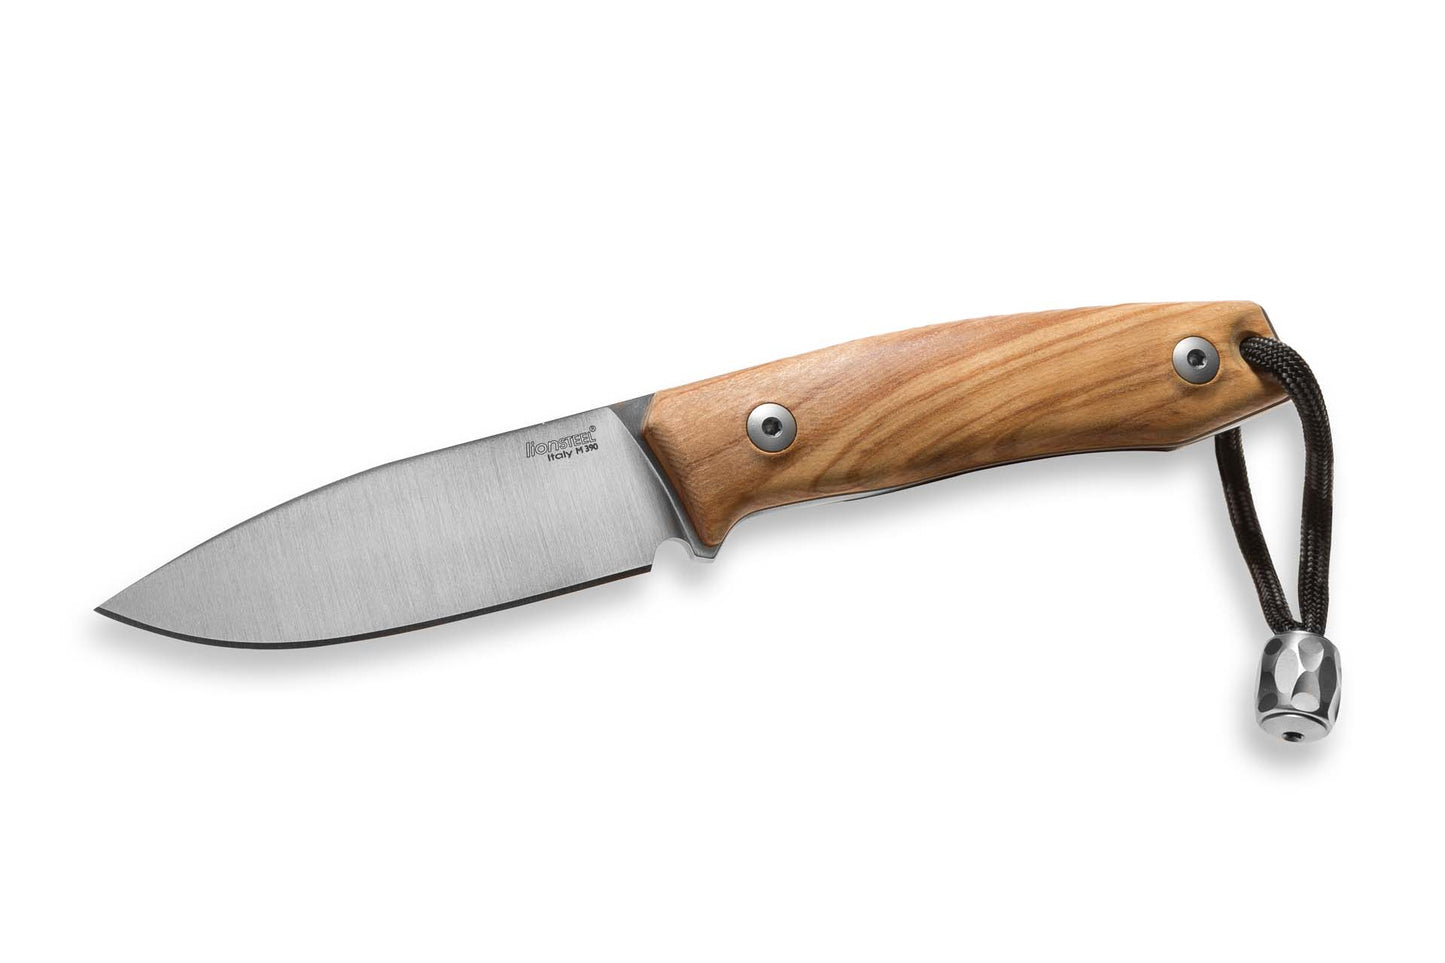 LionSteel M1 2.91" M390 Olive Wood Fixed Blade Knife with Leather Sheath and Titanium Bead